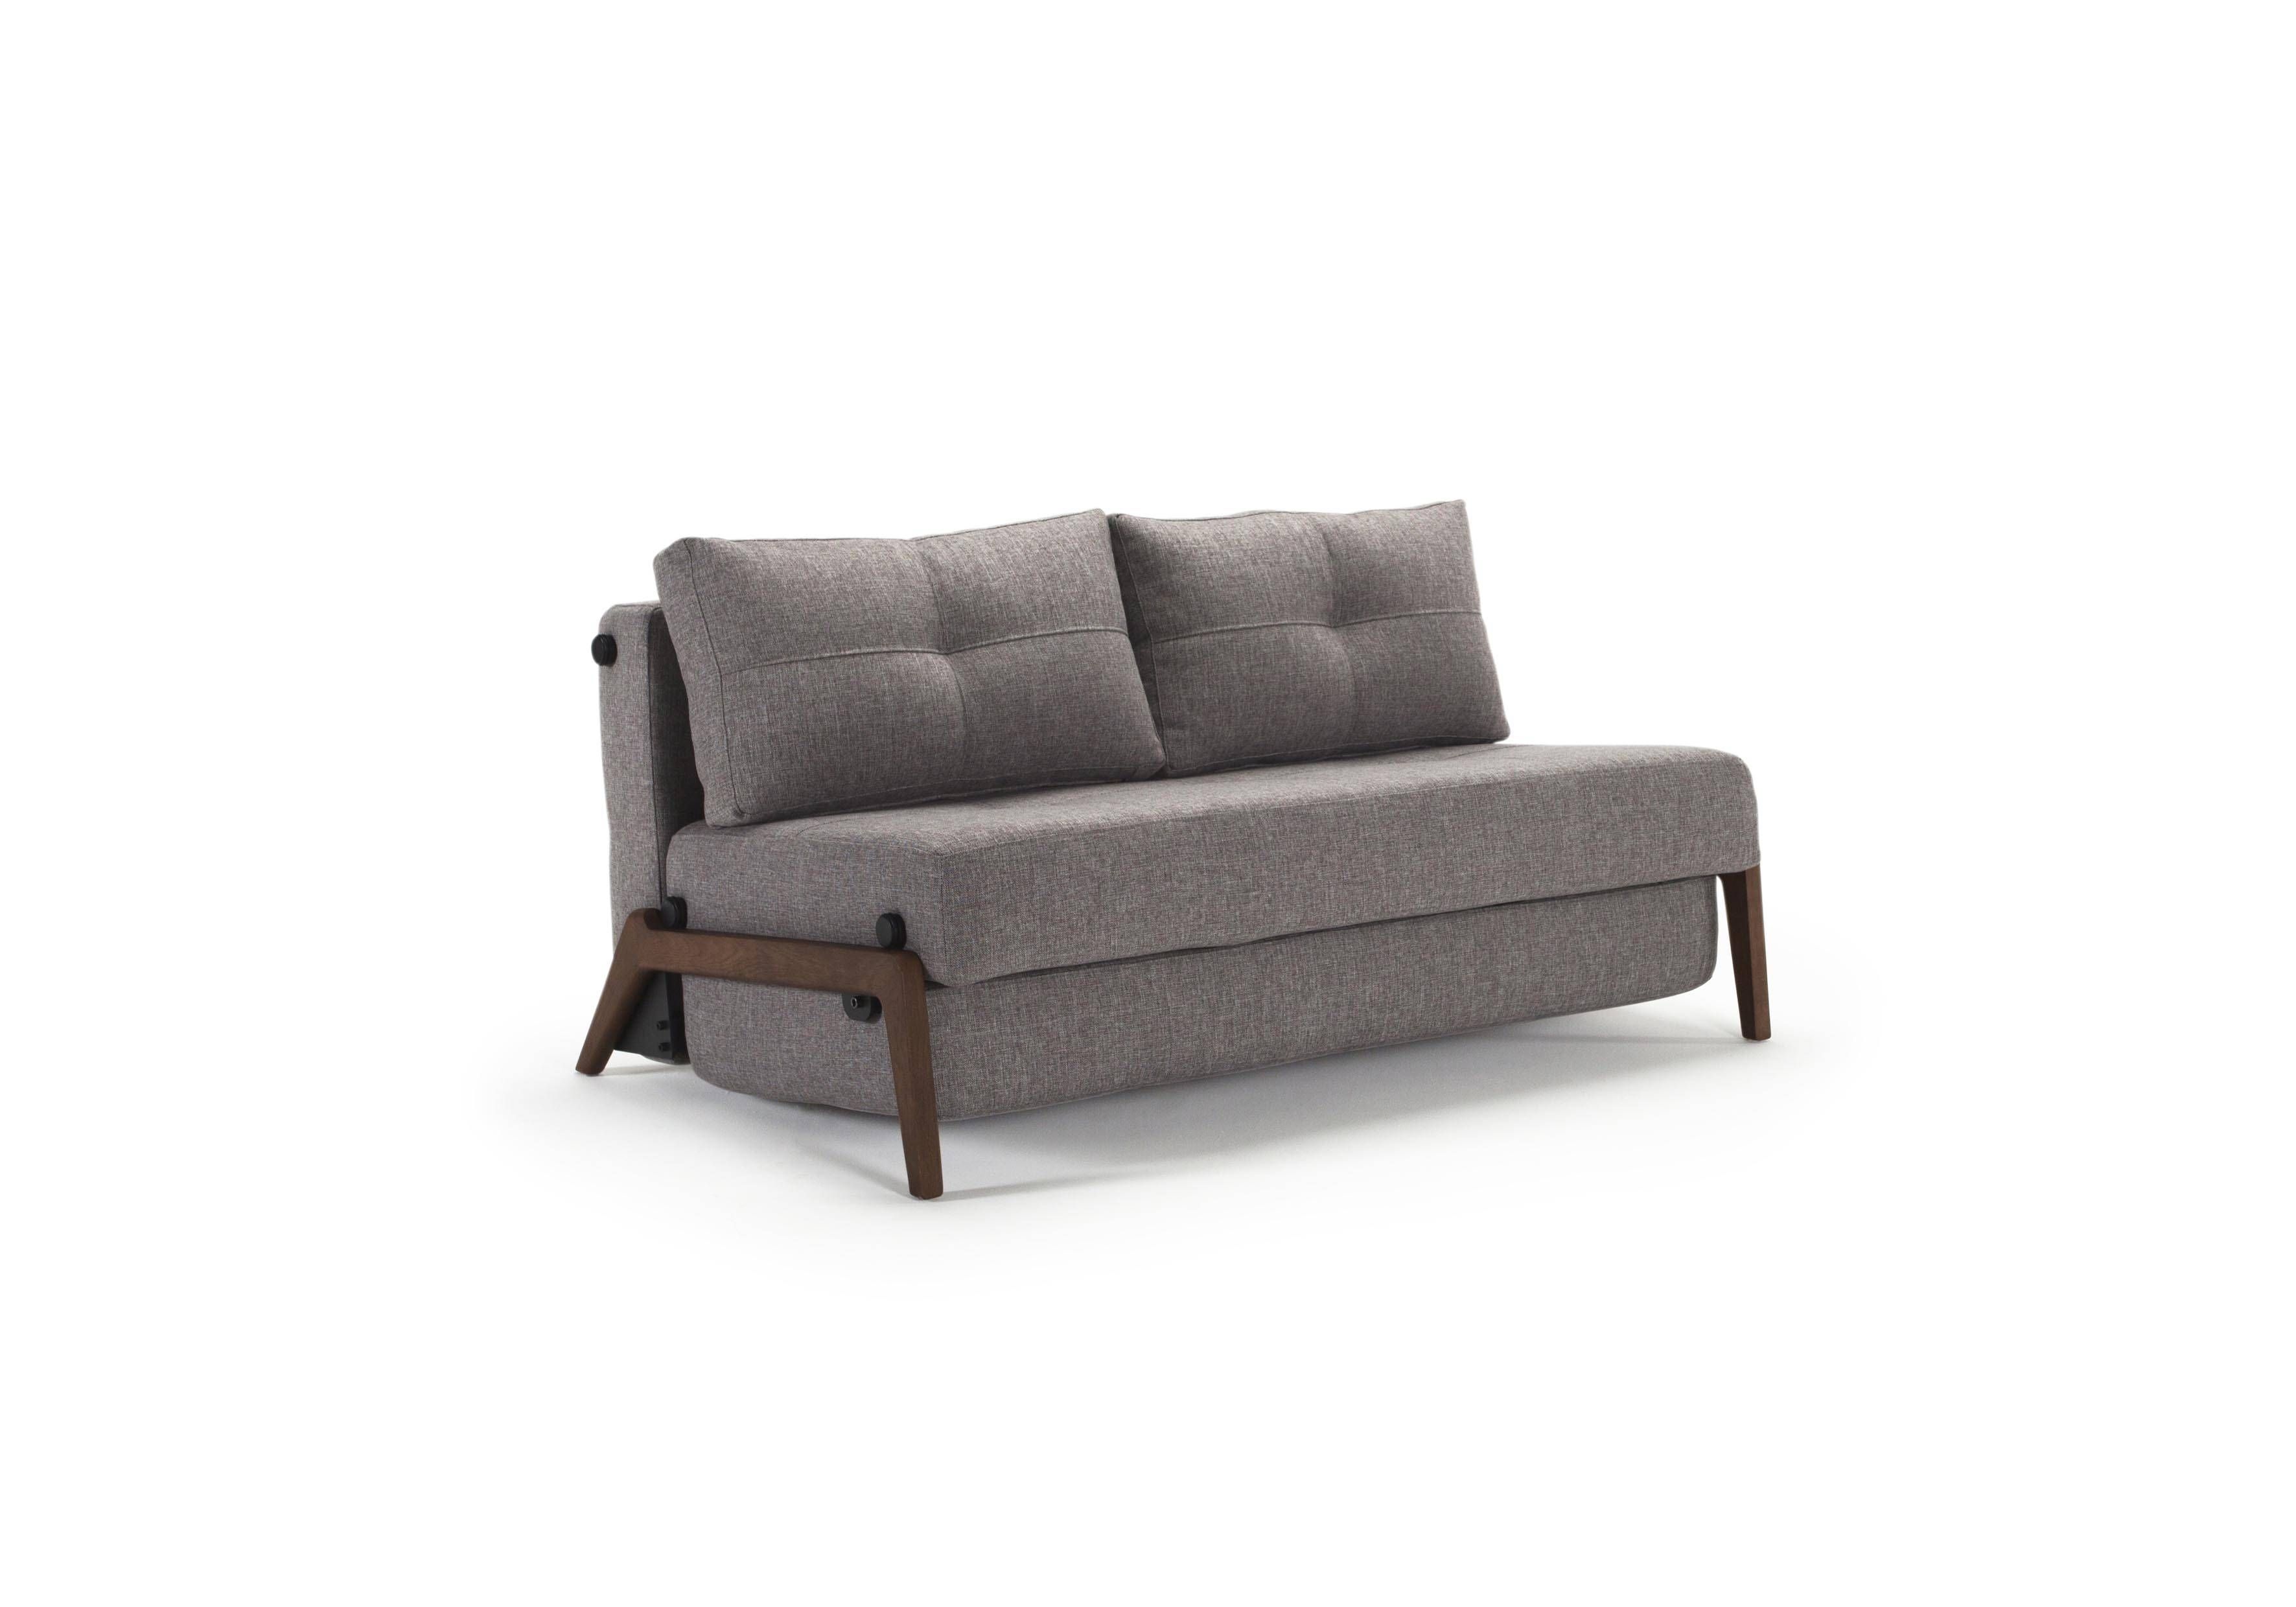 Cubed Deluxe Sofa Bed (queen Size) Mixed Dance Grayinnovation Intended For Sofa Beds Queen (View 12 of 30)